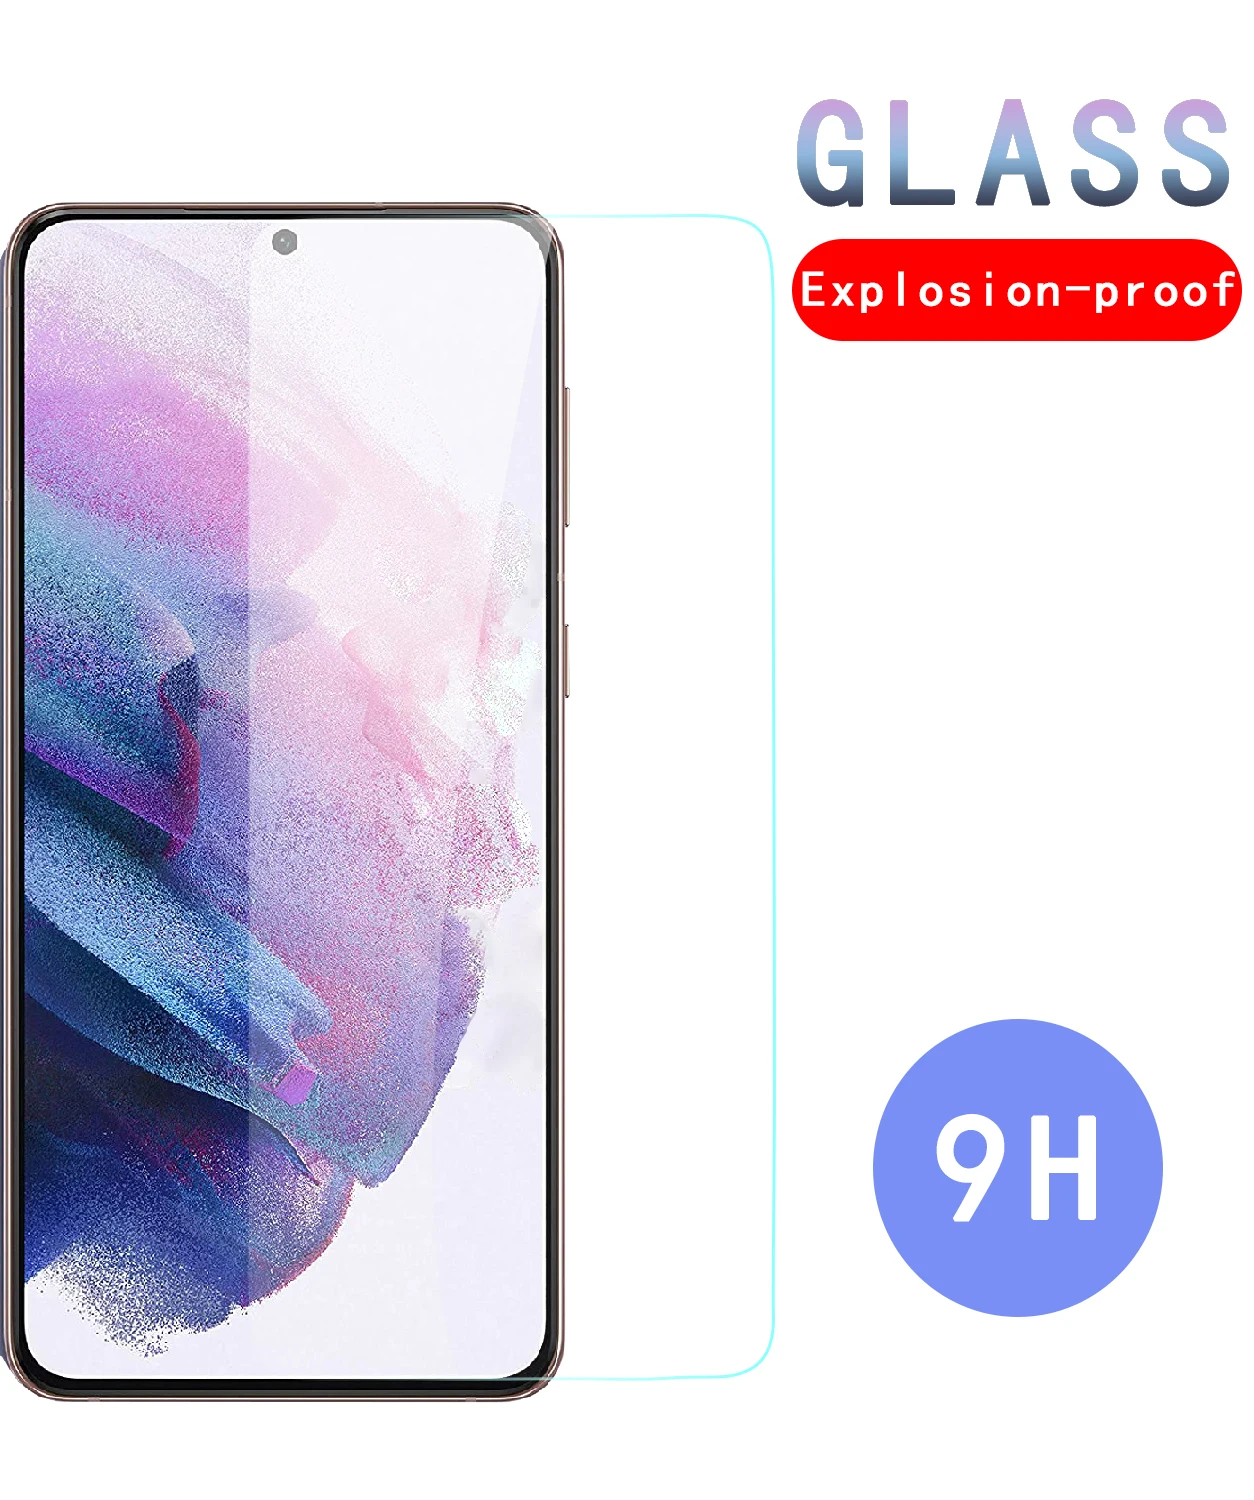 9H Protective Glass For Samsung Galaxy A71 A51 A41 A31 A21S A11 A01 Screen Protector M01 M11 M21 M31 M51 A30 A50 Safety Glass 2pcs tempered glass for samsung a50 a 30s a51 a10 s a11 a21 a70 a71 galaxy m31 m21 m51 m11 screen protector on galaxy a50s film